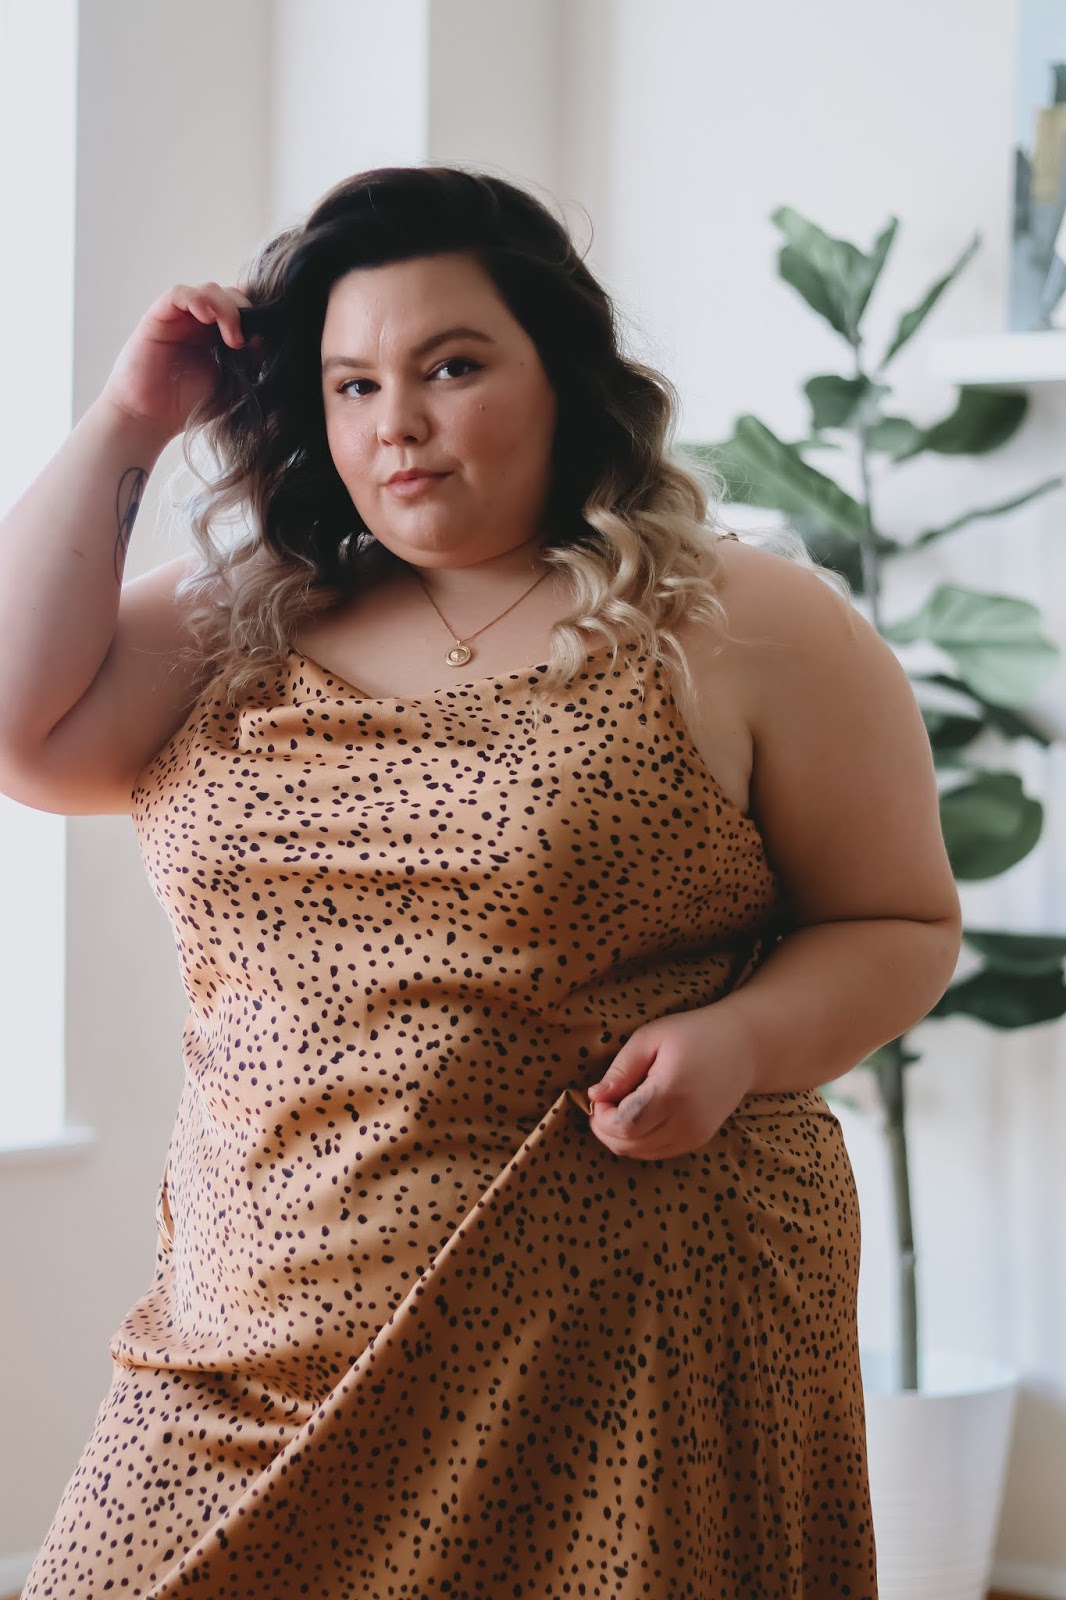 Chicago Plus Size Petite Fashion Blogger Natalie in the City talks work from home outfits and reviews Adore Me's dresses.